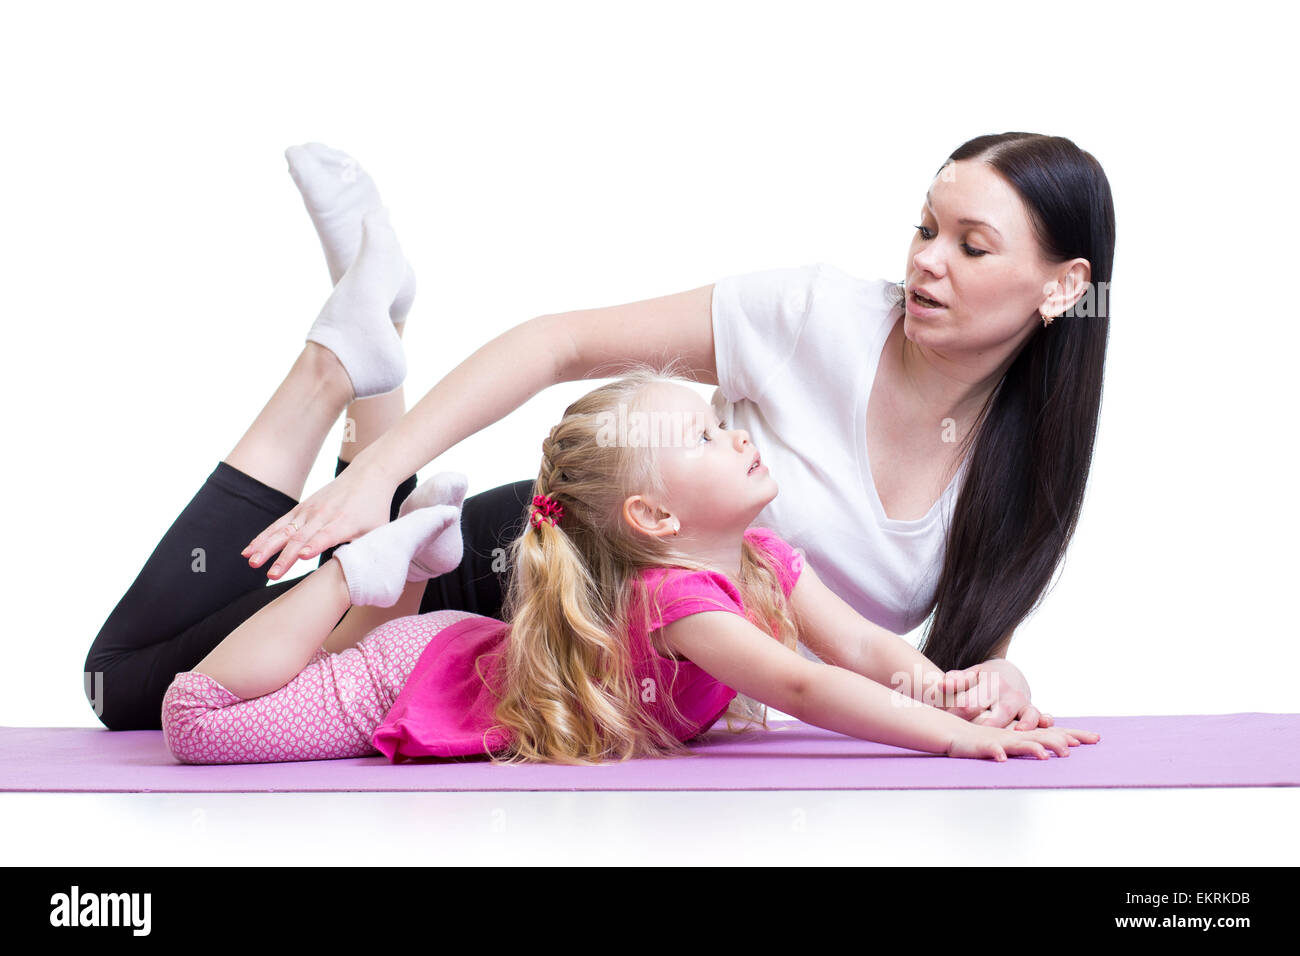 mother teaches kid girl exercising showing by example Stock Photo